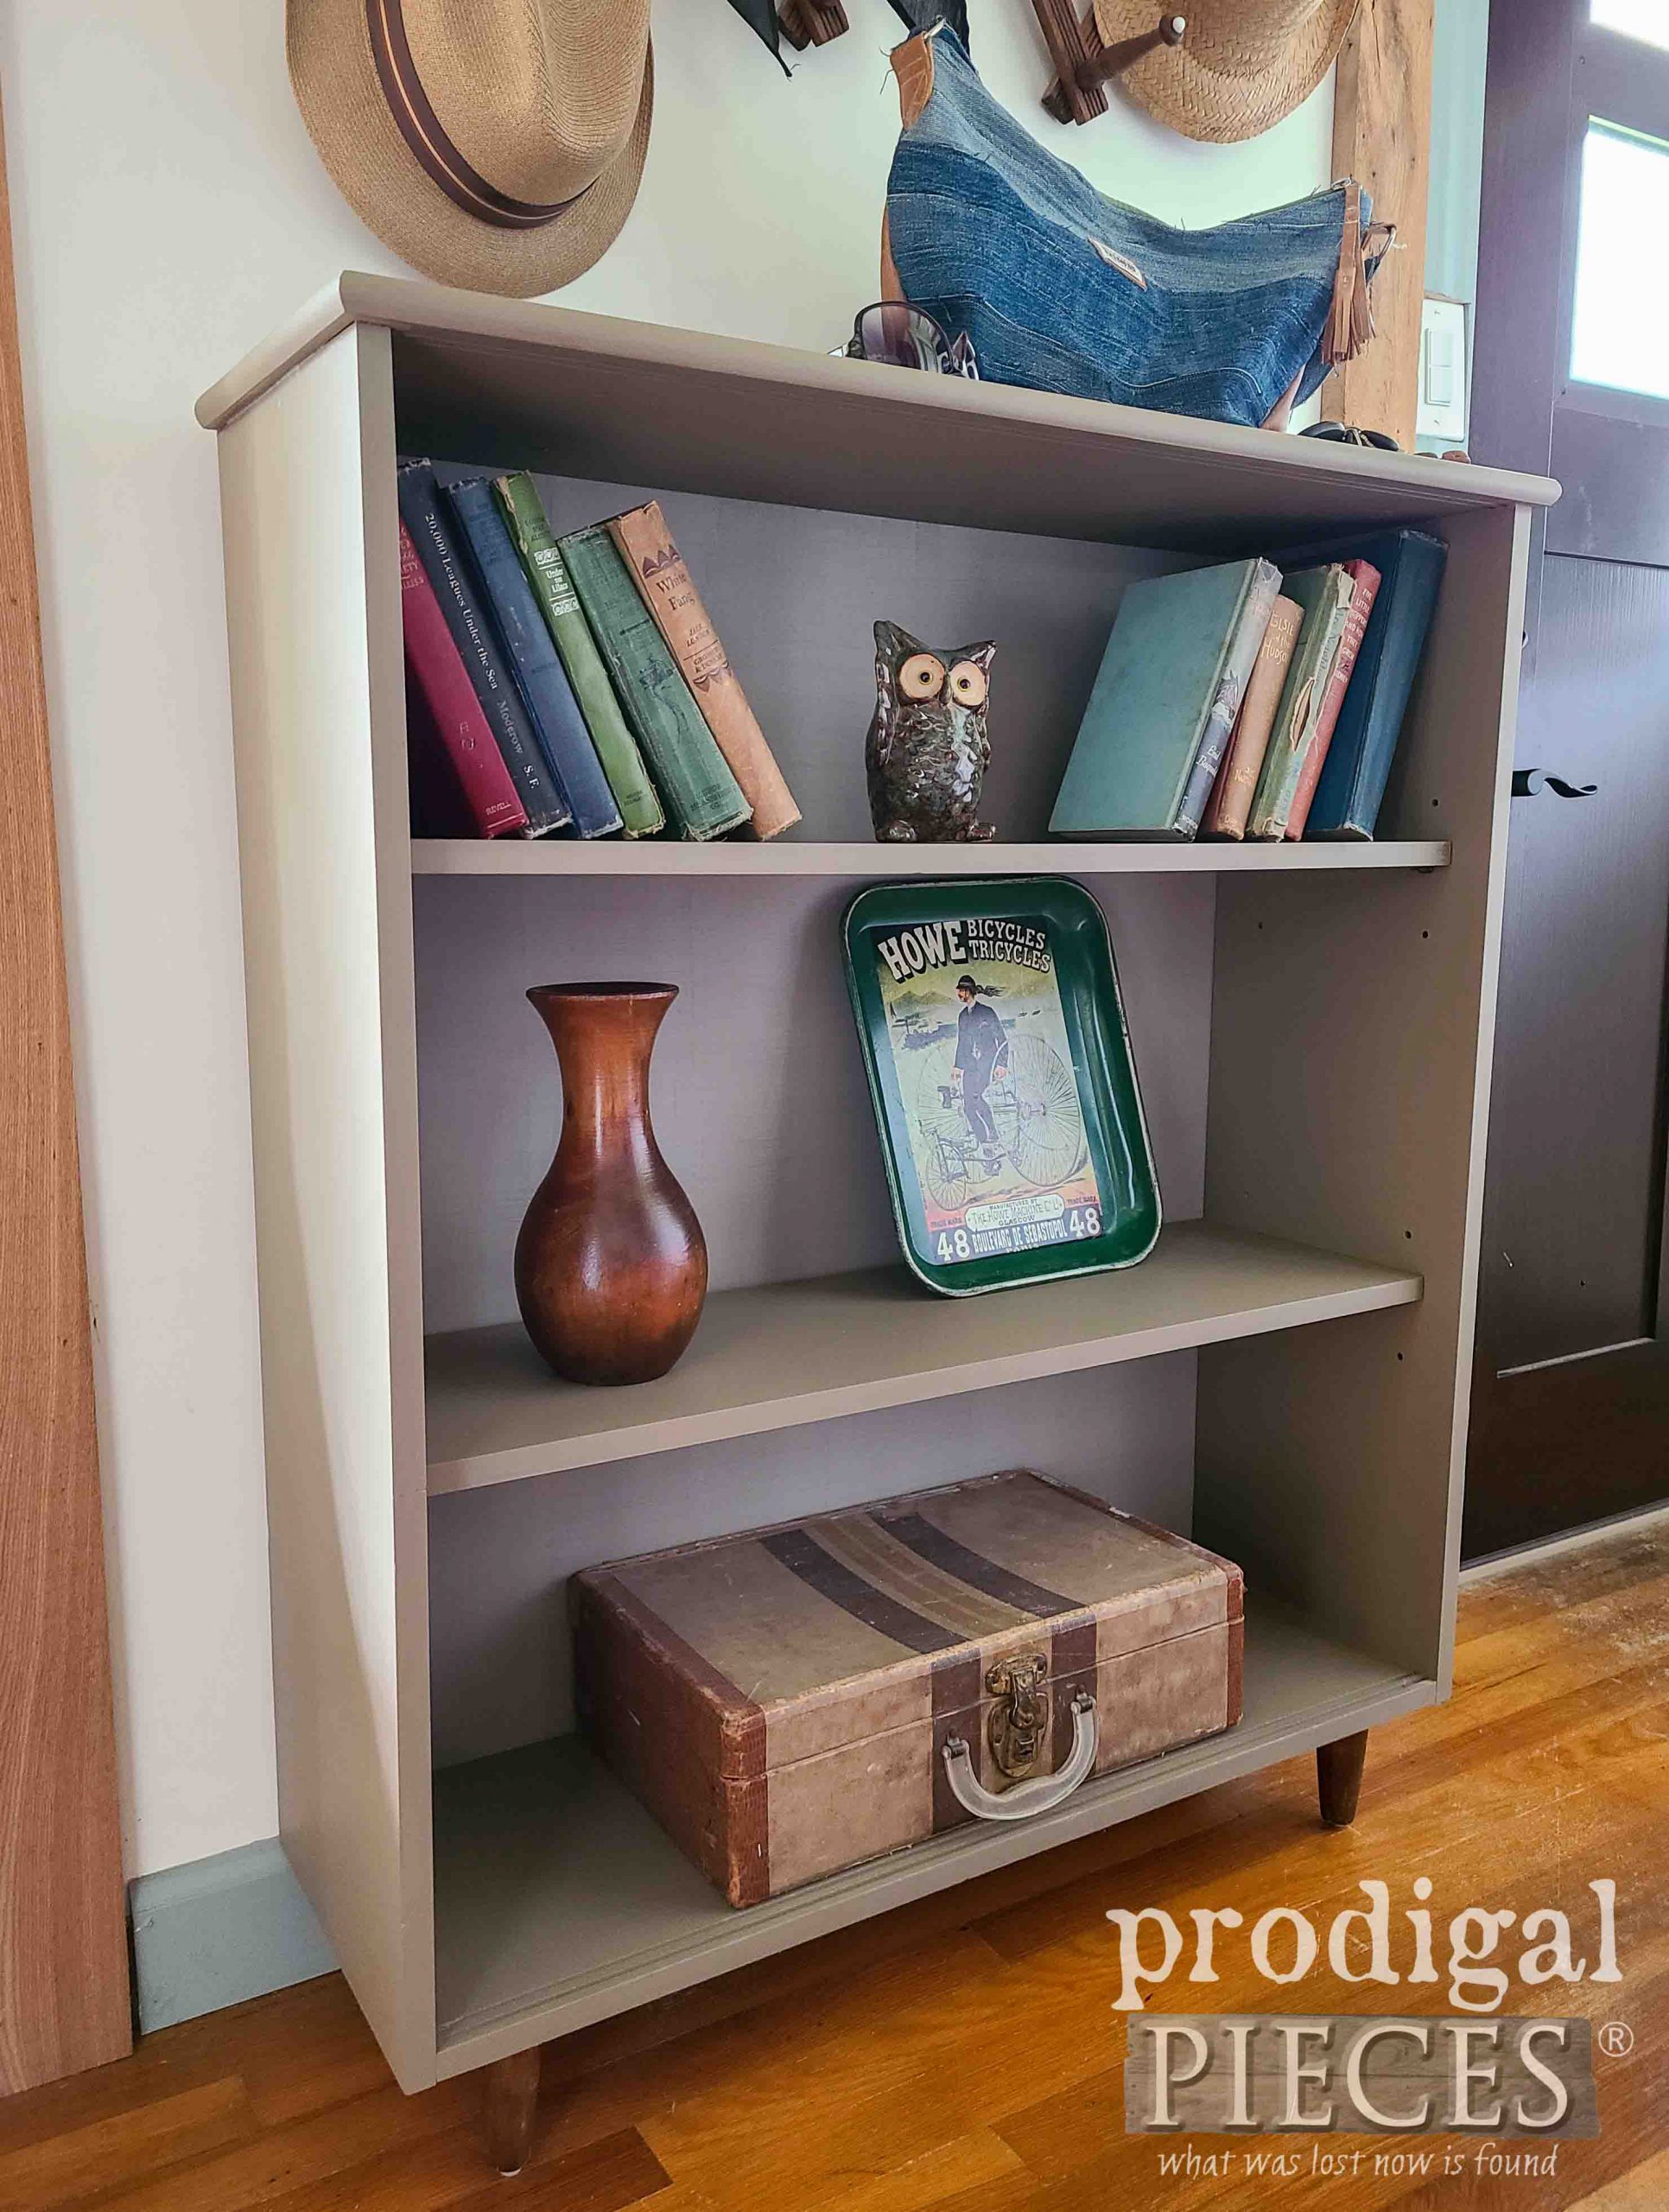 Vintage Mid Century Modern Bookcase Makeover by Larissa of Prodigal Pieces | prodigalpieces.com #prodigalpieces #vintage #furniture #homedecor